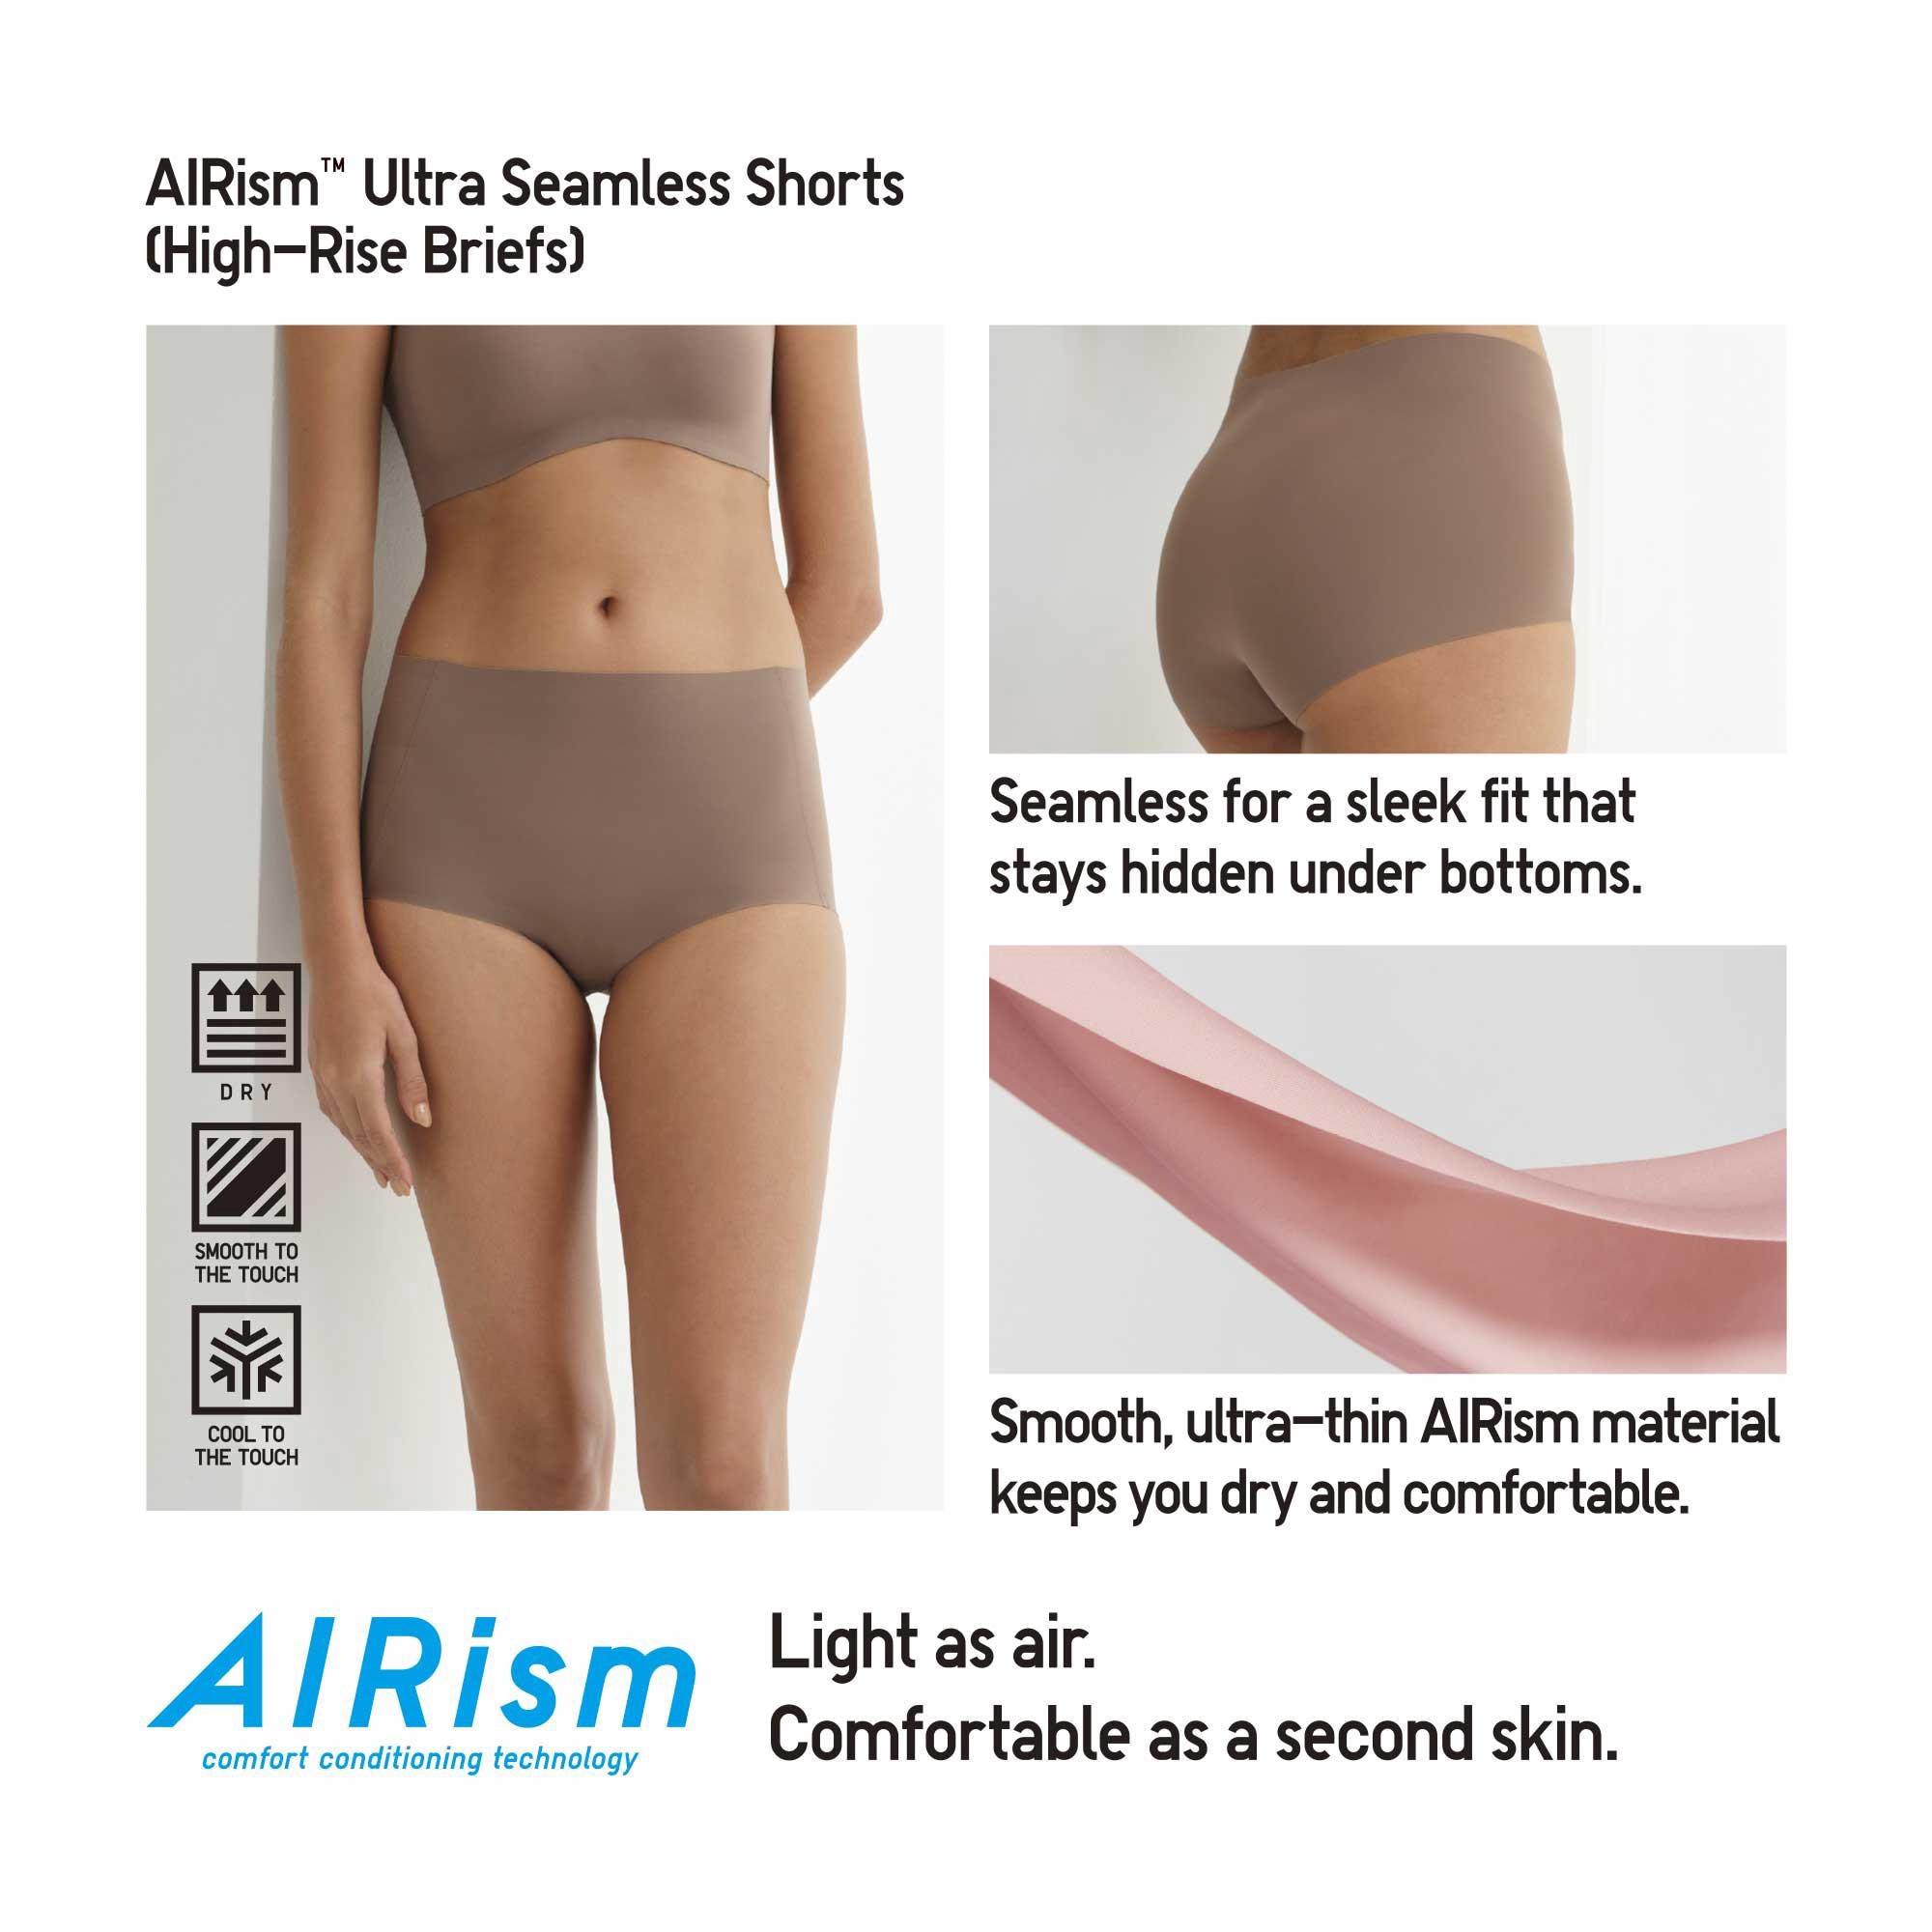 WOMENS AIRISM ULTRA SEAMLESS SHORTS HIPHUGGER  UNIQLO VN